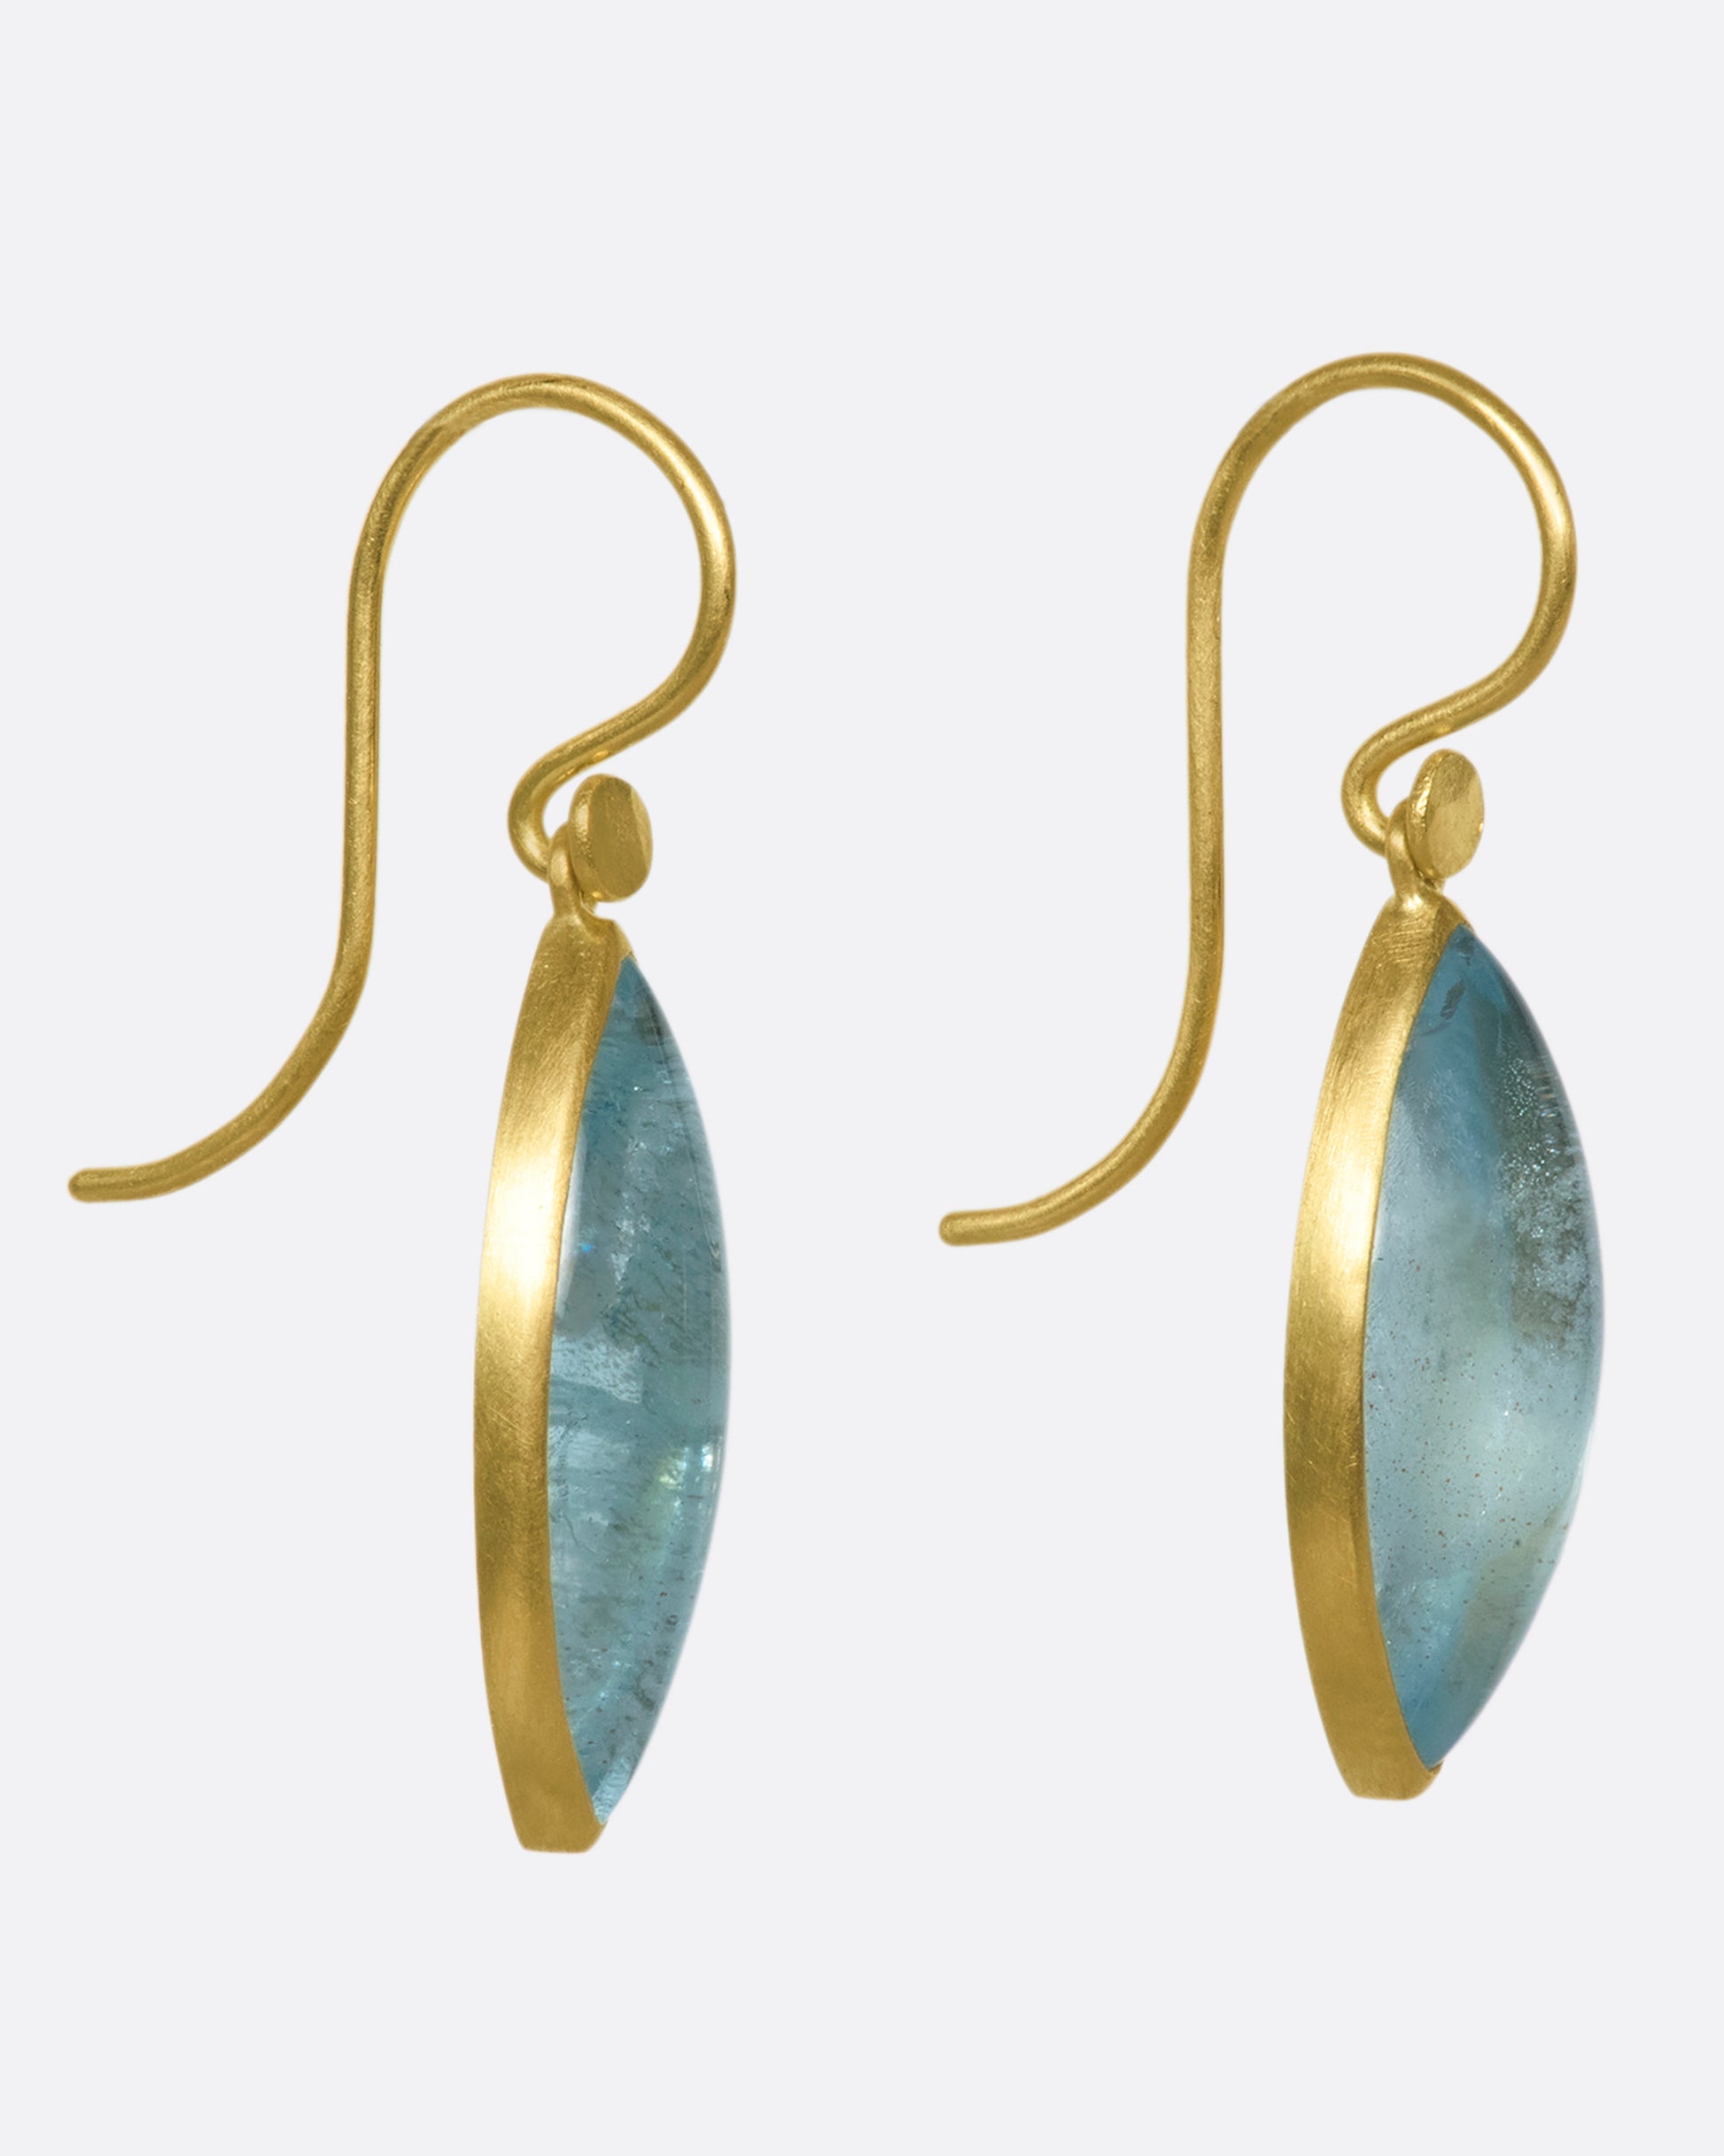 A pair of 18k gold dangling earrings with aquamarine navette drops. These elongated aquamarines contrast with any hair color, making them a versatile and gorgeous pop of color while wearing your hair up or down.